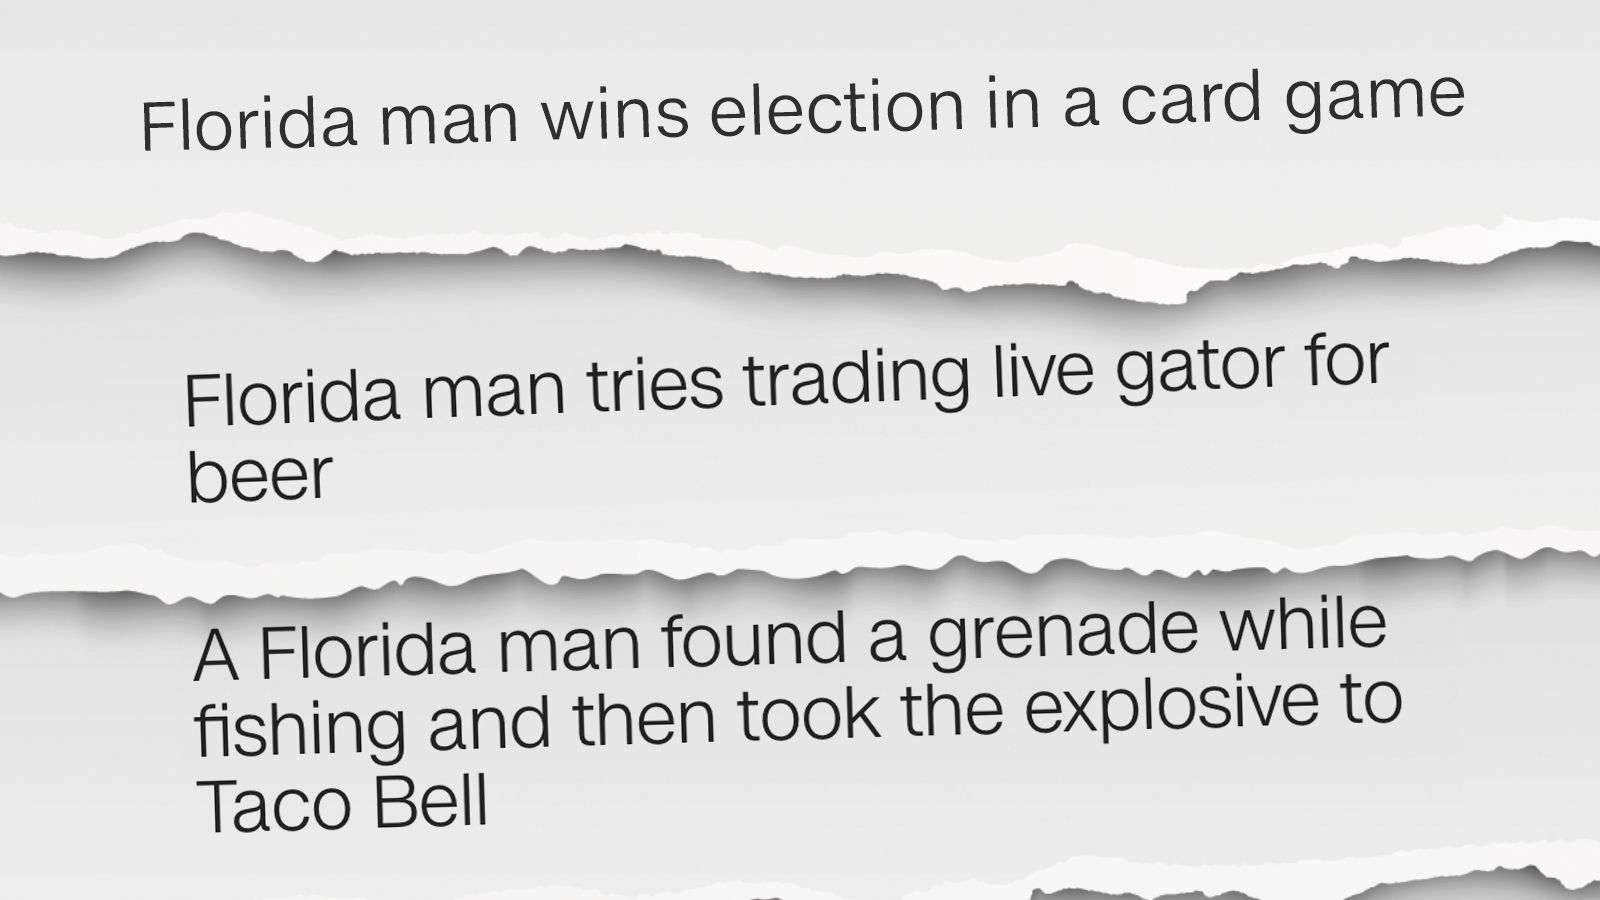 Florida man challenge: Why so many crazy stories come out of the state | CNN